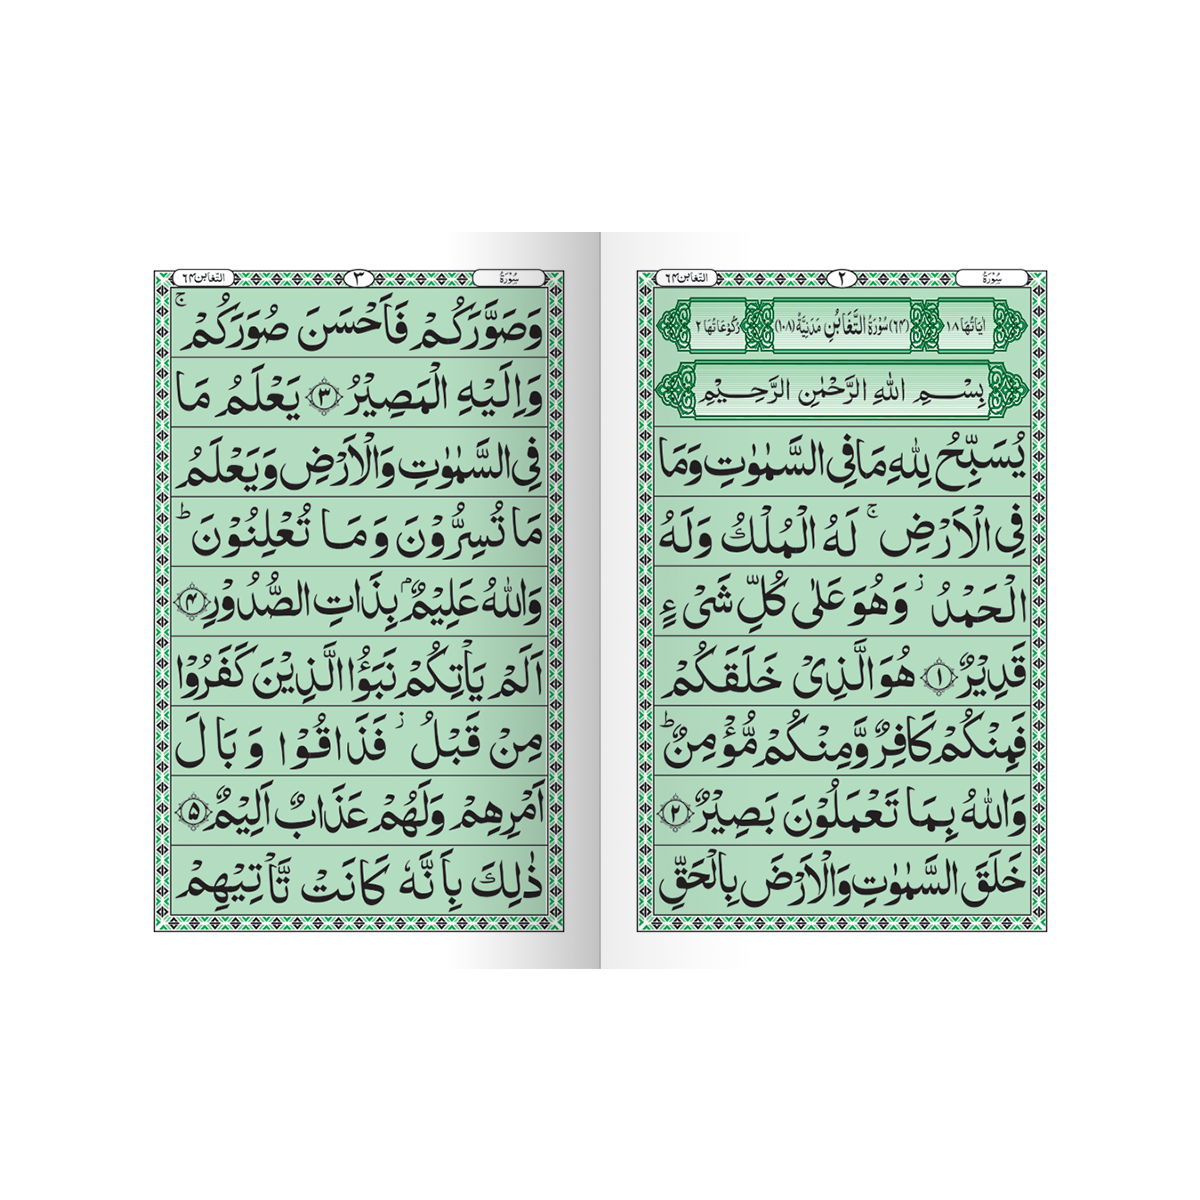 [IK213] Surah At-Taghabun in Big Letters (Without Translation)